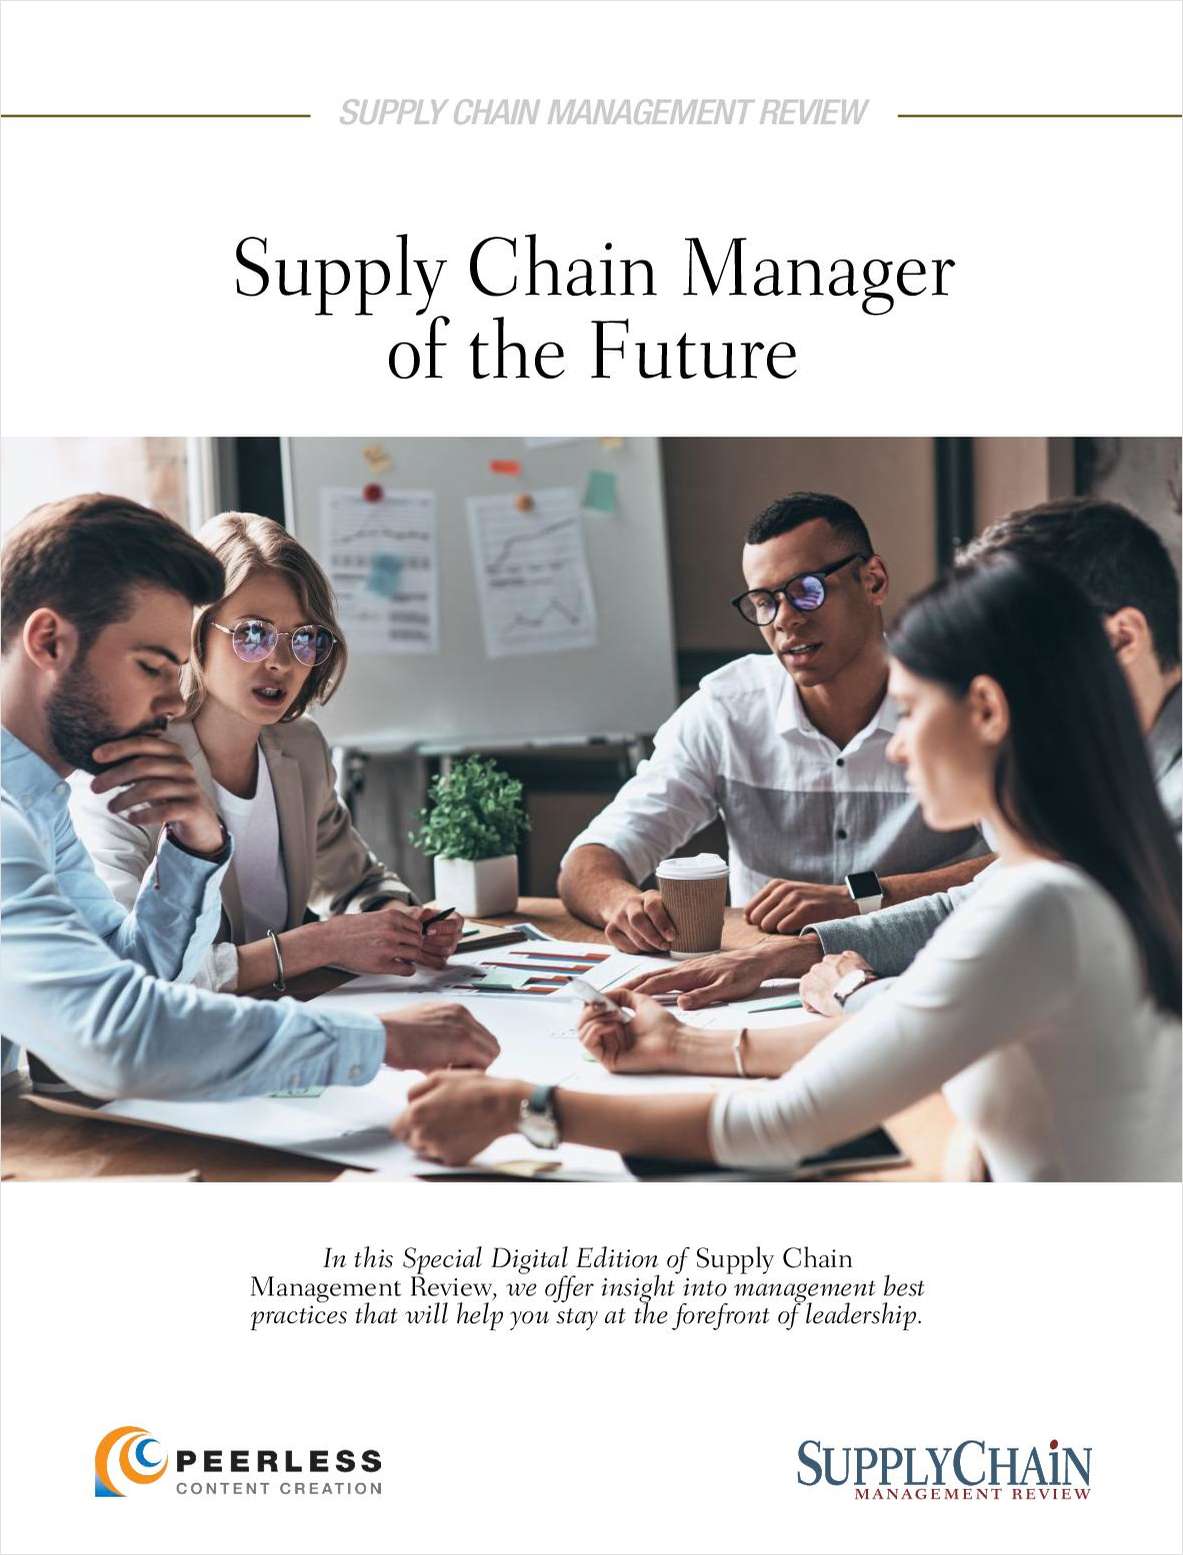 Taking Supply Chain into the Future